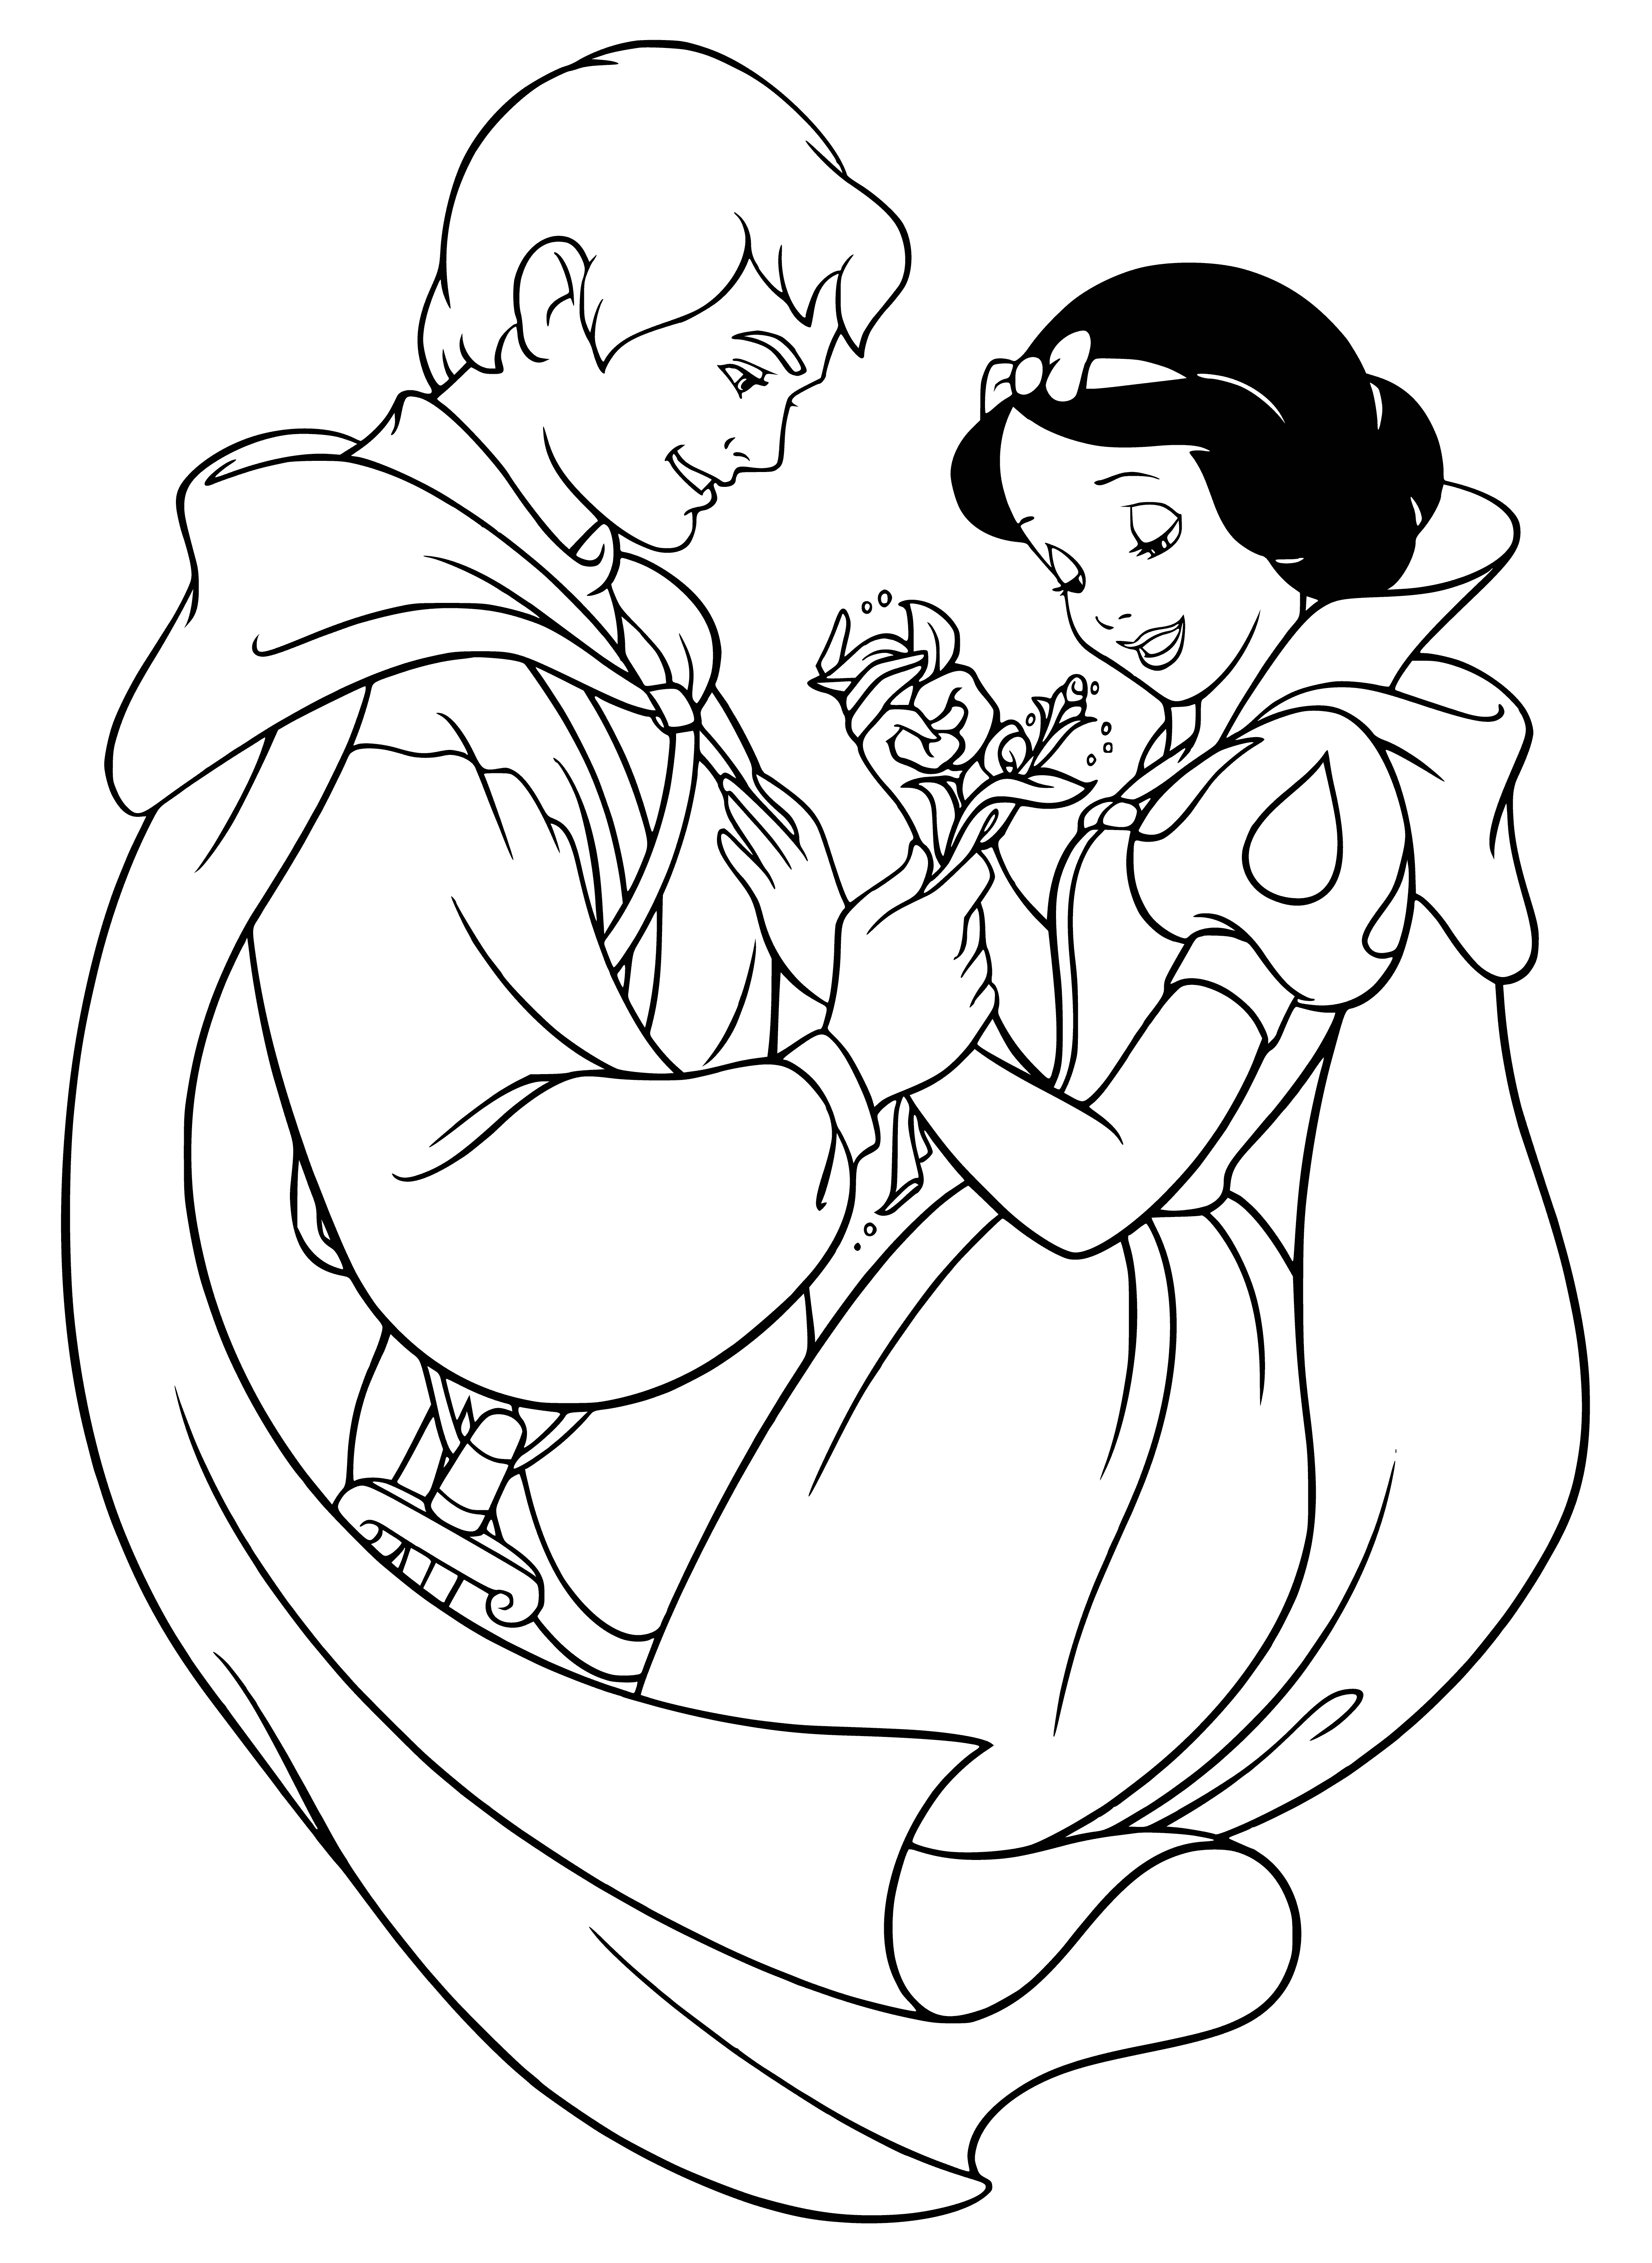 The prince is in love with Snow White coloring page